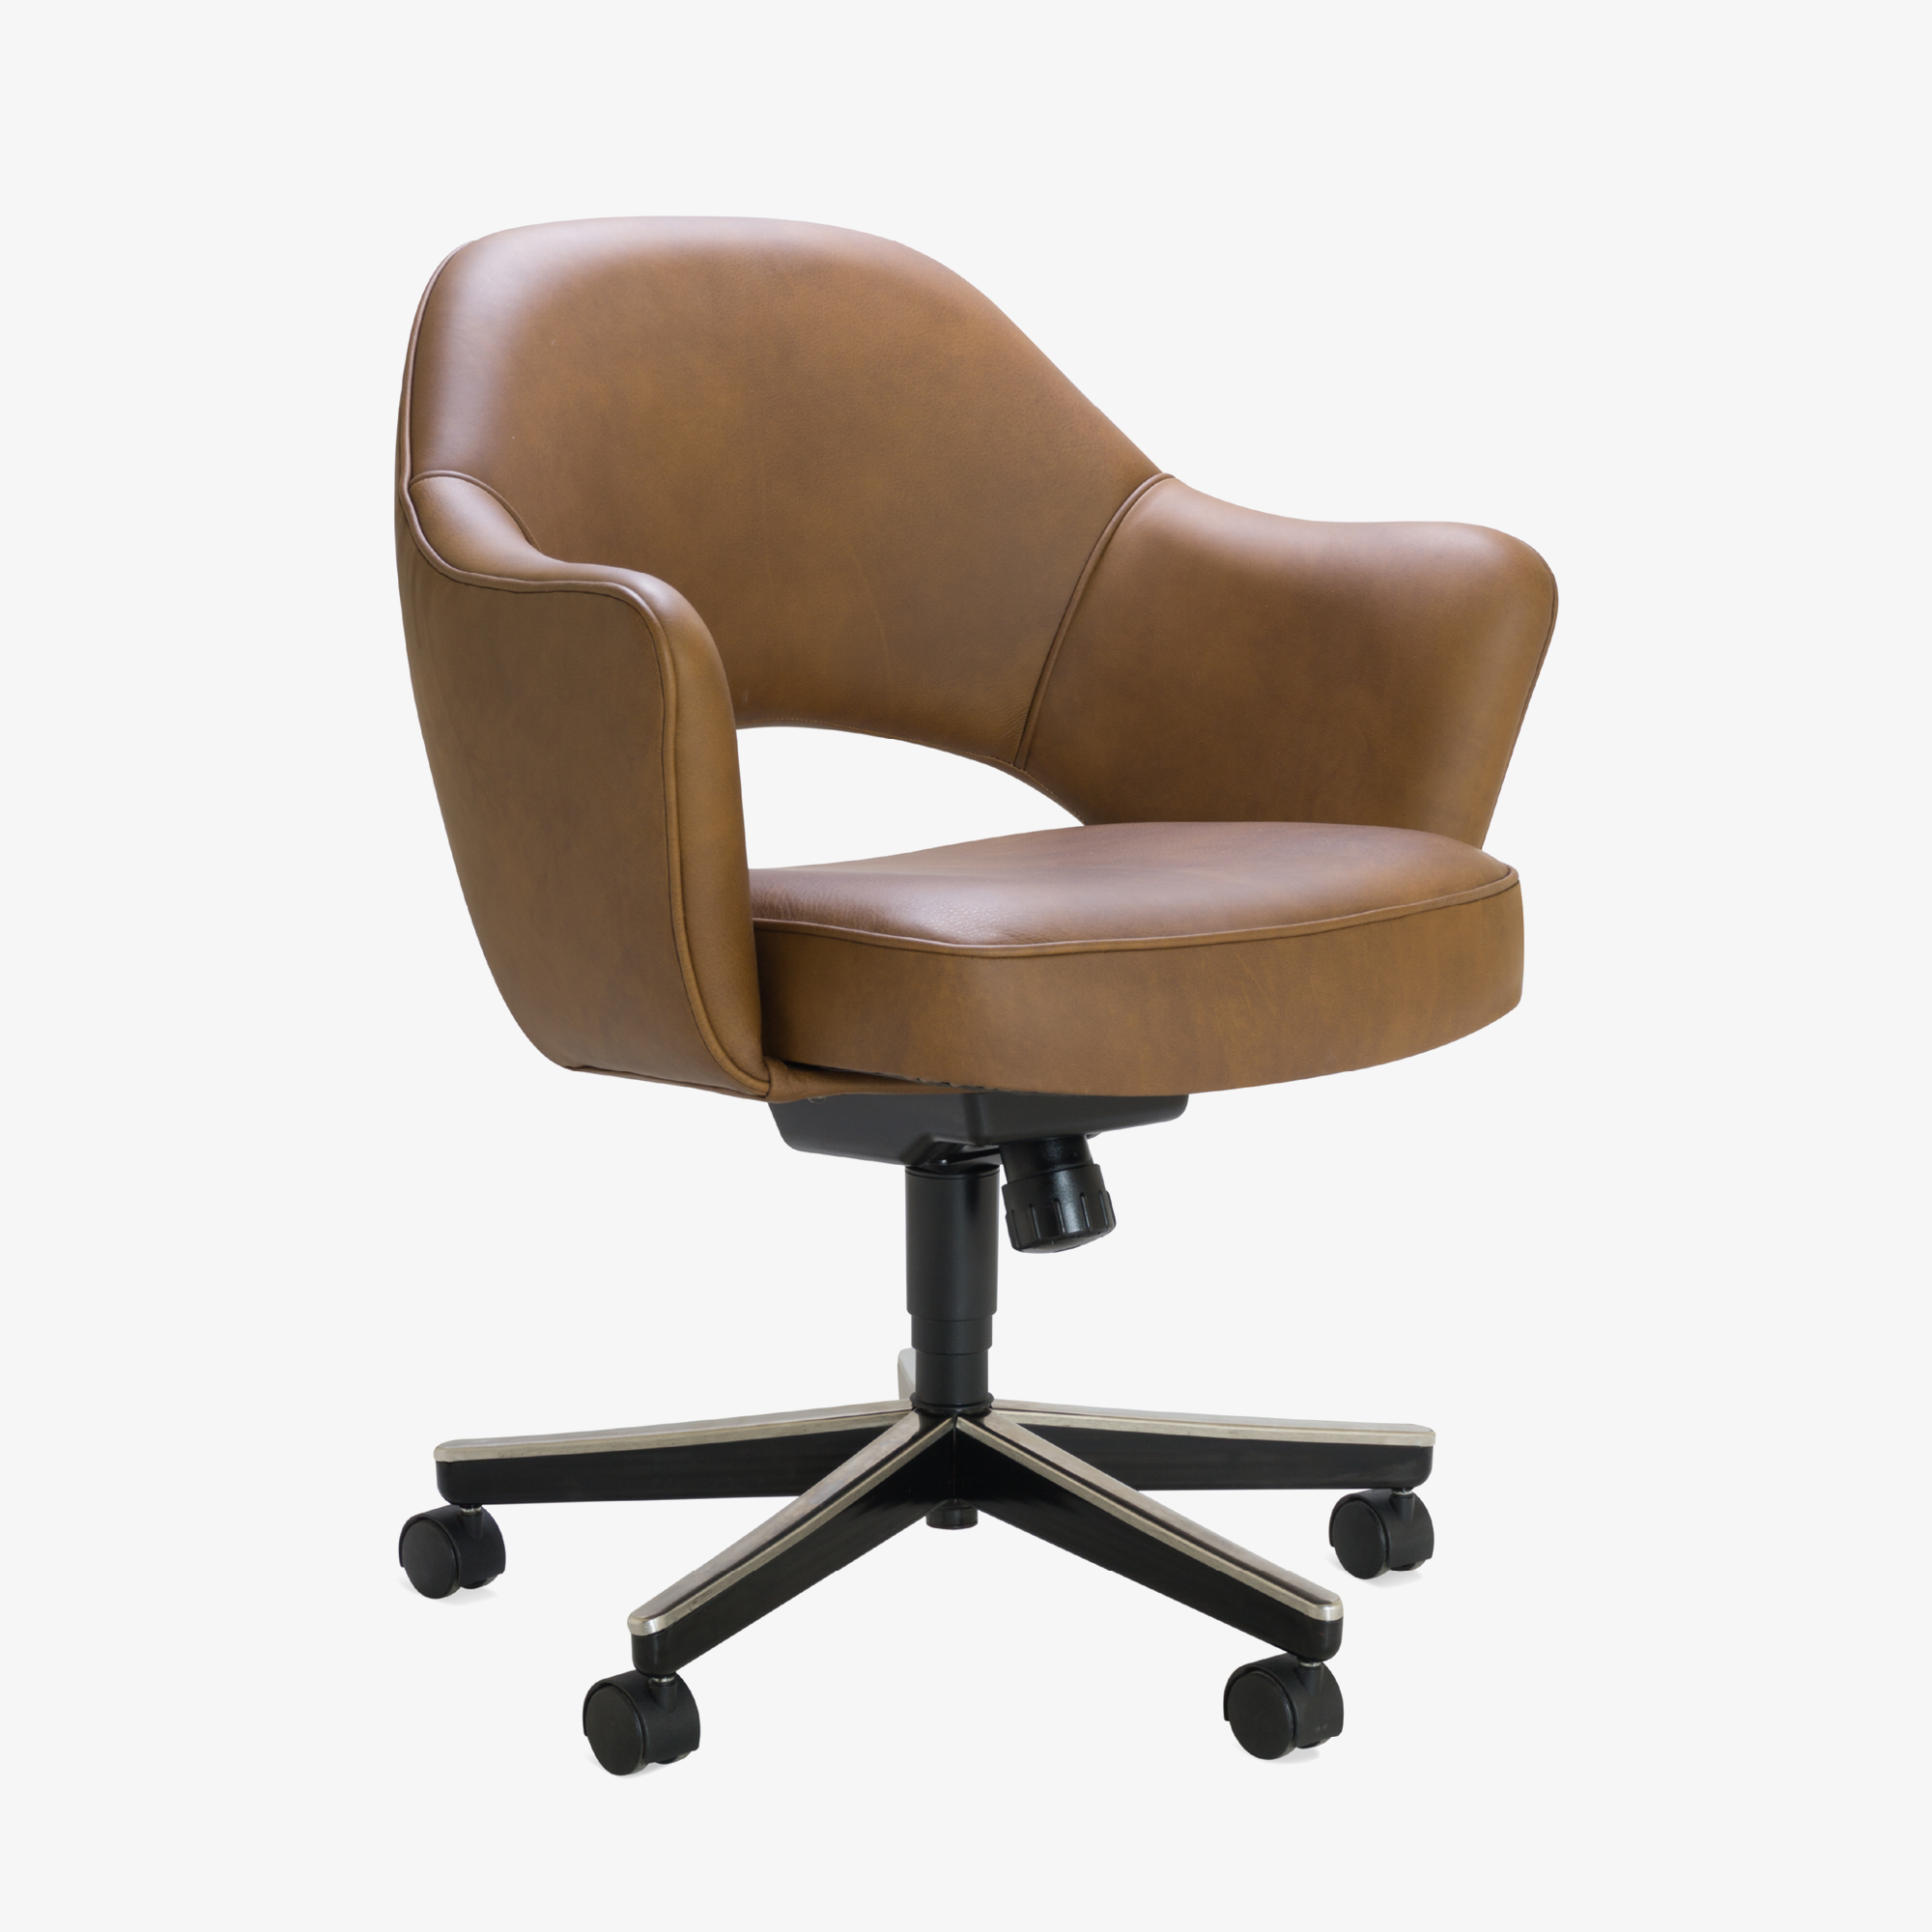 Saarinen Executive Arm Chair in Saddle Leather, Swivel Base2.png